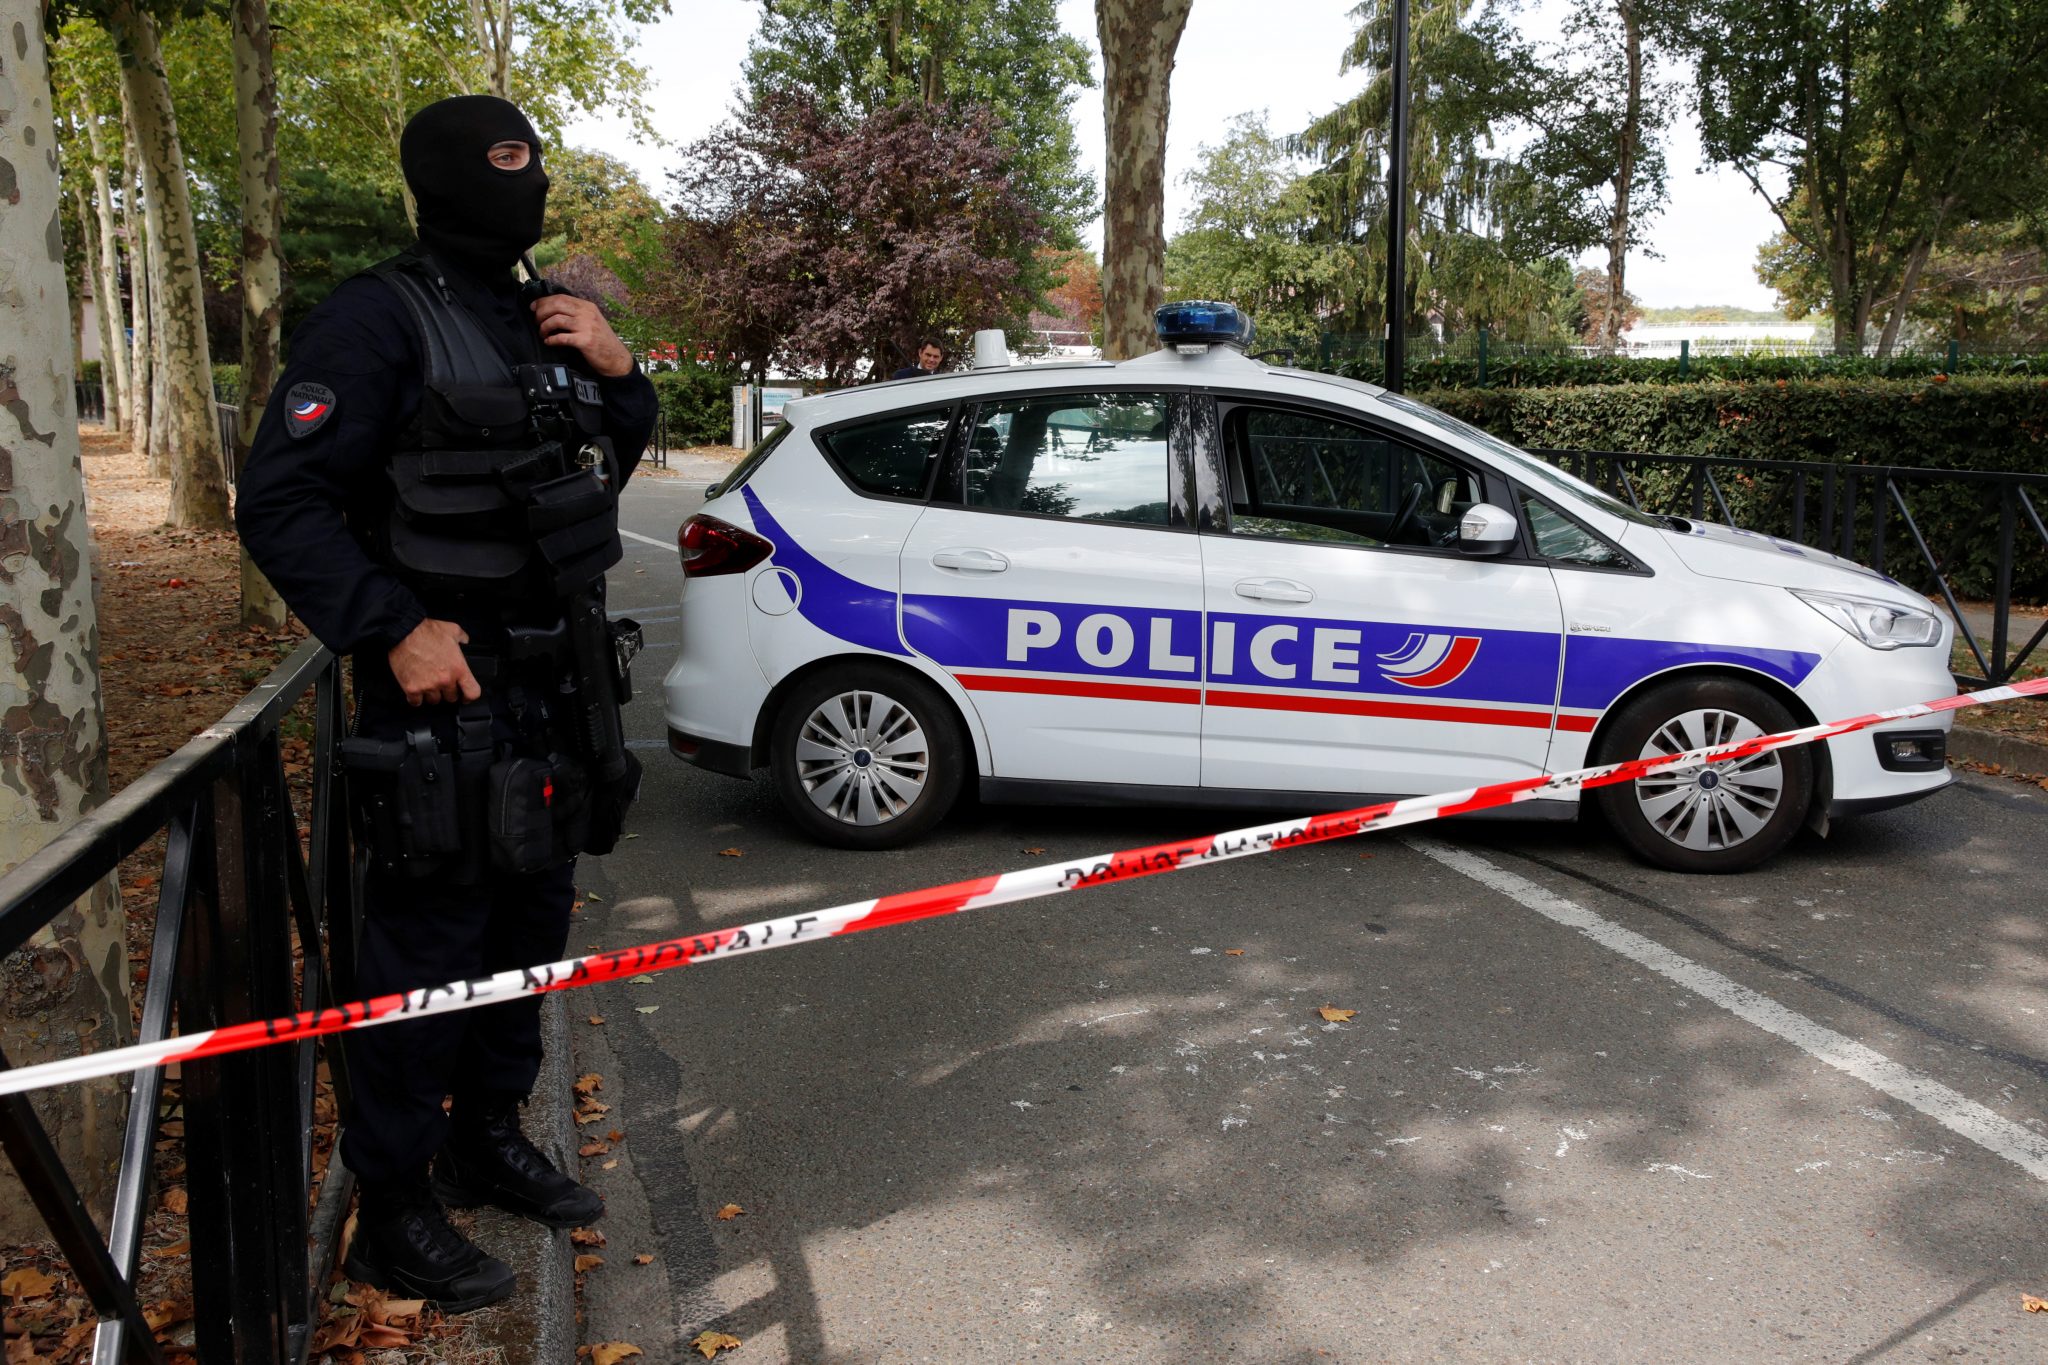 Islamist-linked stabbing attack in France indicates continuing threat: French police secure a street after a man killed two persons and injured an other in a knife attack in Trappes, near Paris, according to French authorities, France, August 23, 2018. REUTERS/Philippe Wojazer - RC1F88A76AF0